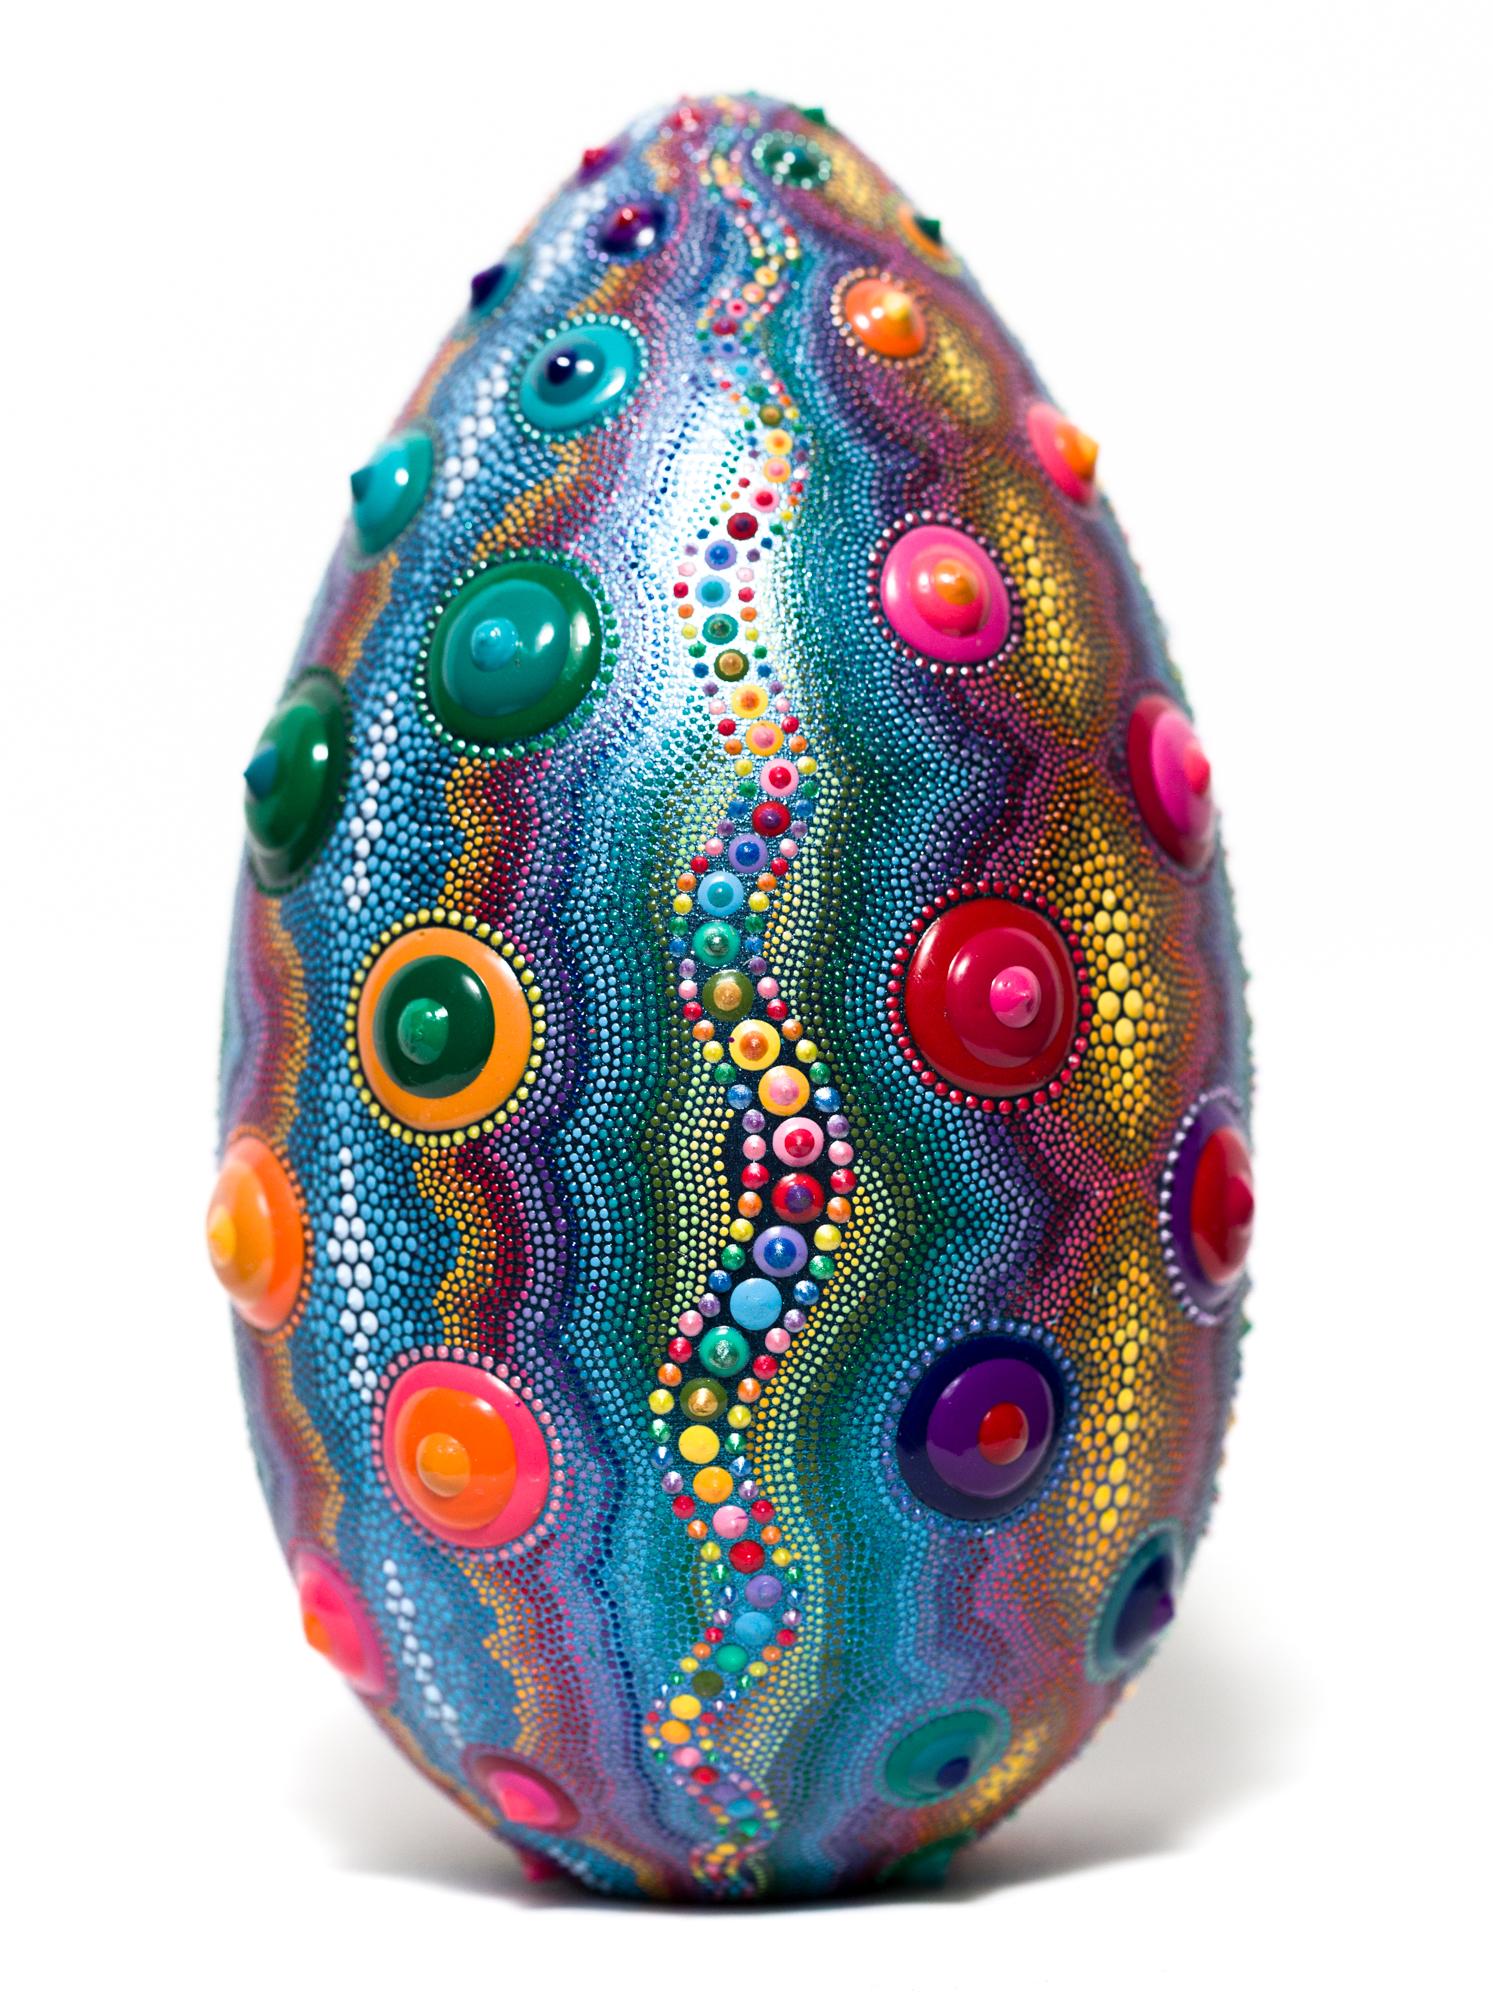 PJ Linden Abstract Sculpture - "Candy Urchin Egg", Egg Motif, Patterns, Bright colors, texture, dimensional